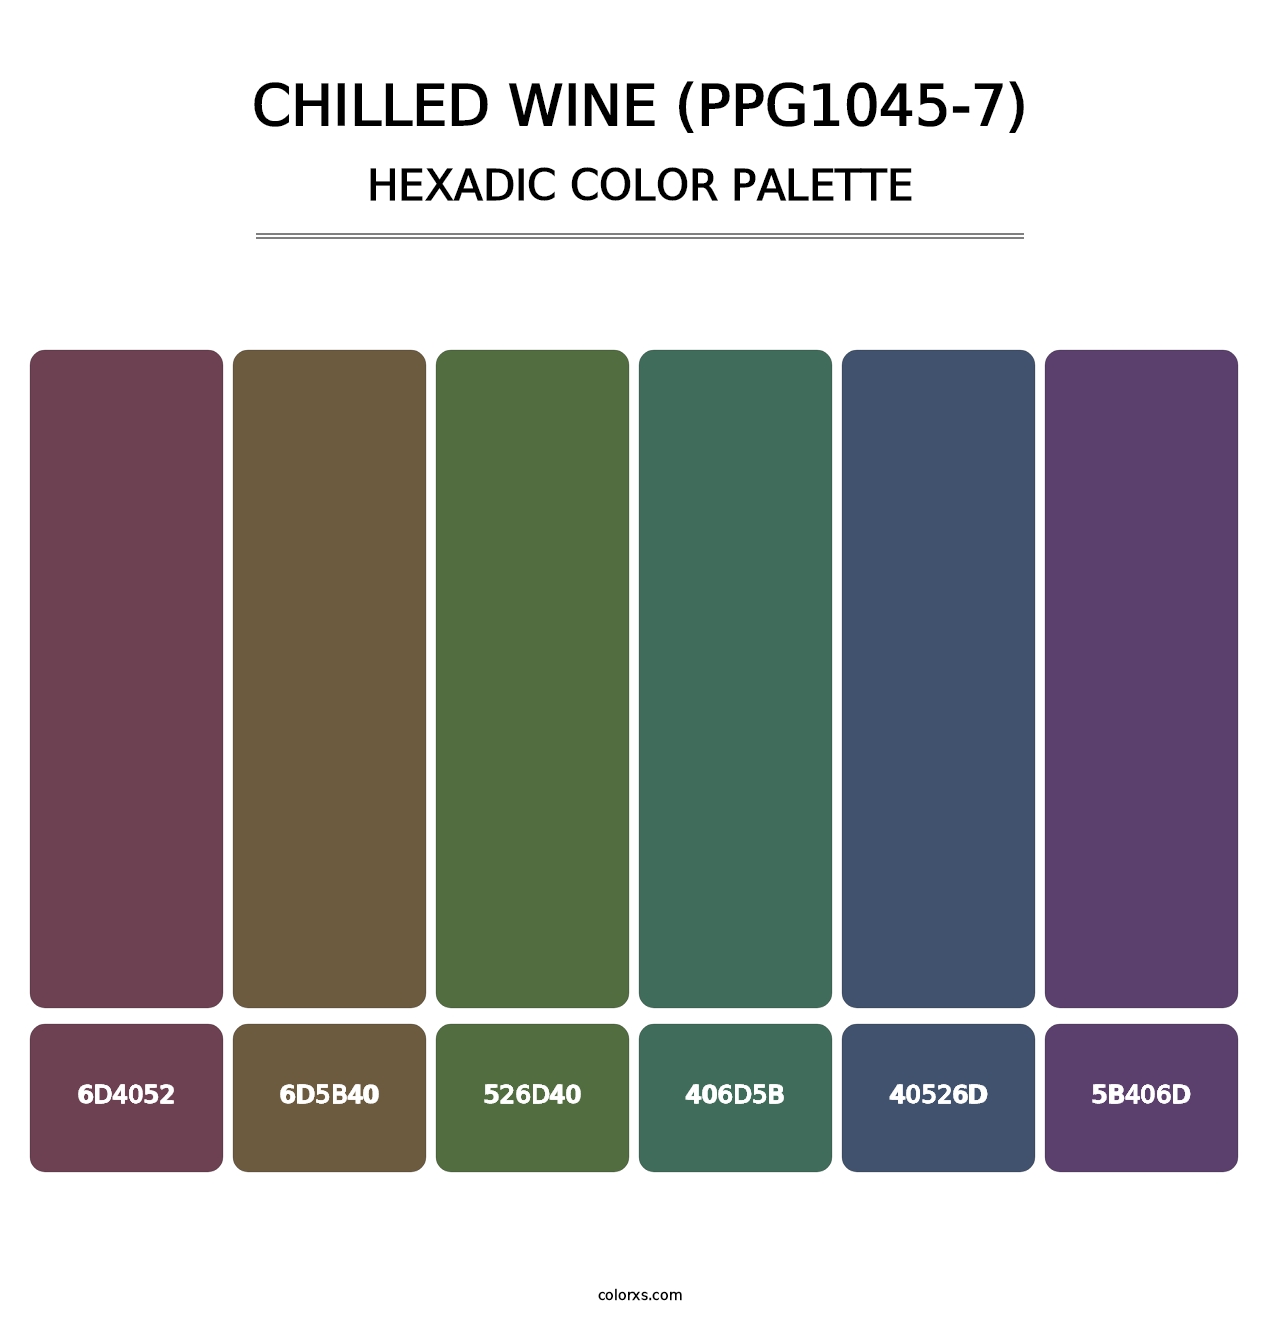 Chilled Wine (PPG1045-7) - Hexadic Color Palette